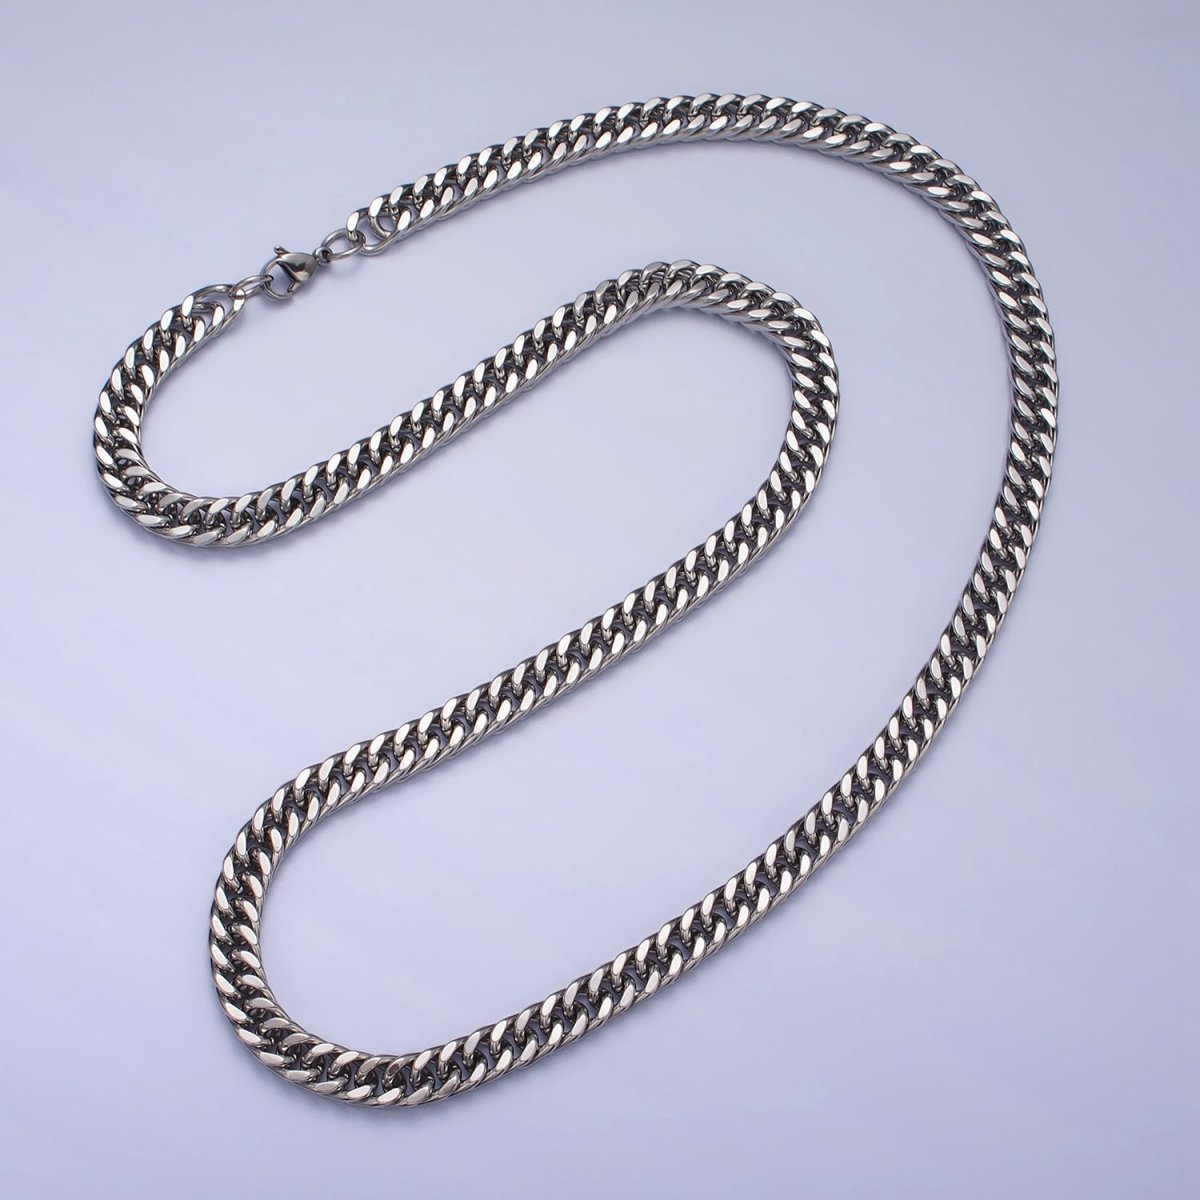 Men's Chain Necklace, Cuban Link Chain Necklace, Stainless Steel Silver Chain, 7mm Cuban Chain Necklace 23.5 inch | WA-1591 WA-1592 Clearance Pricing - DLUXCA